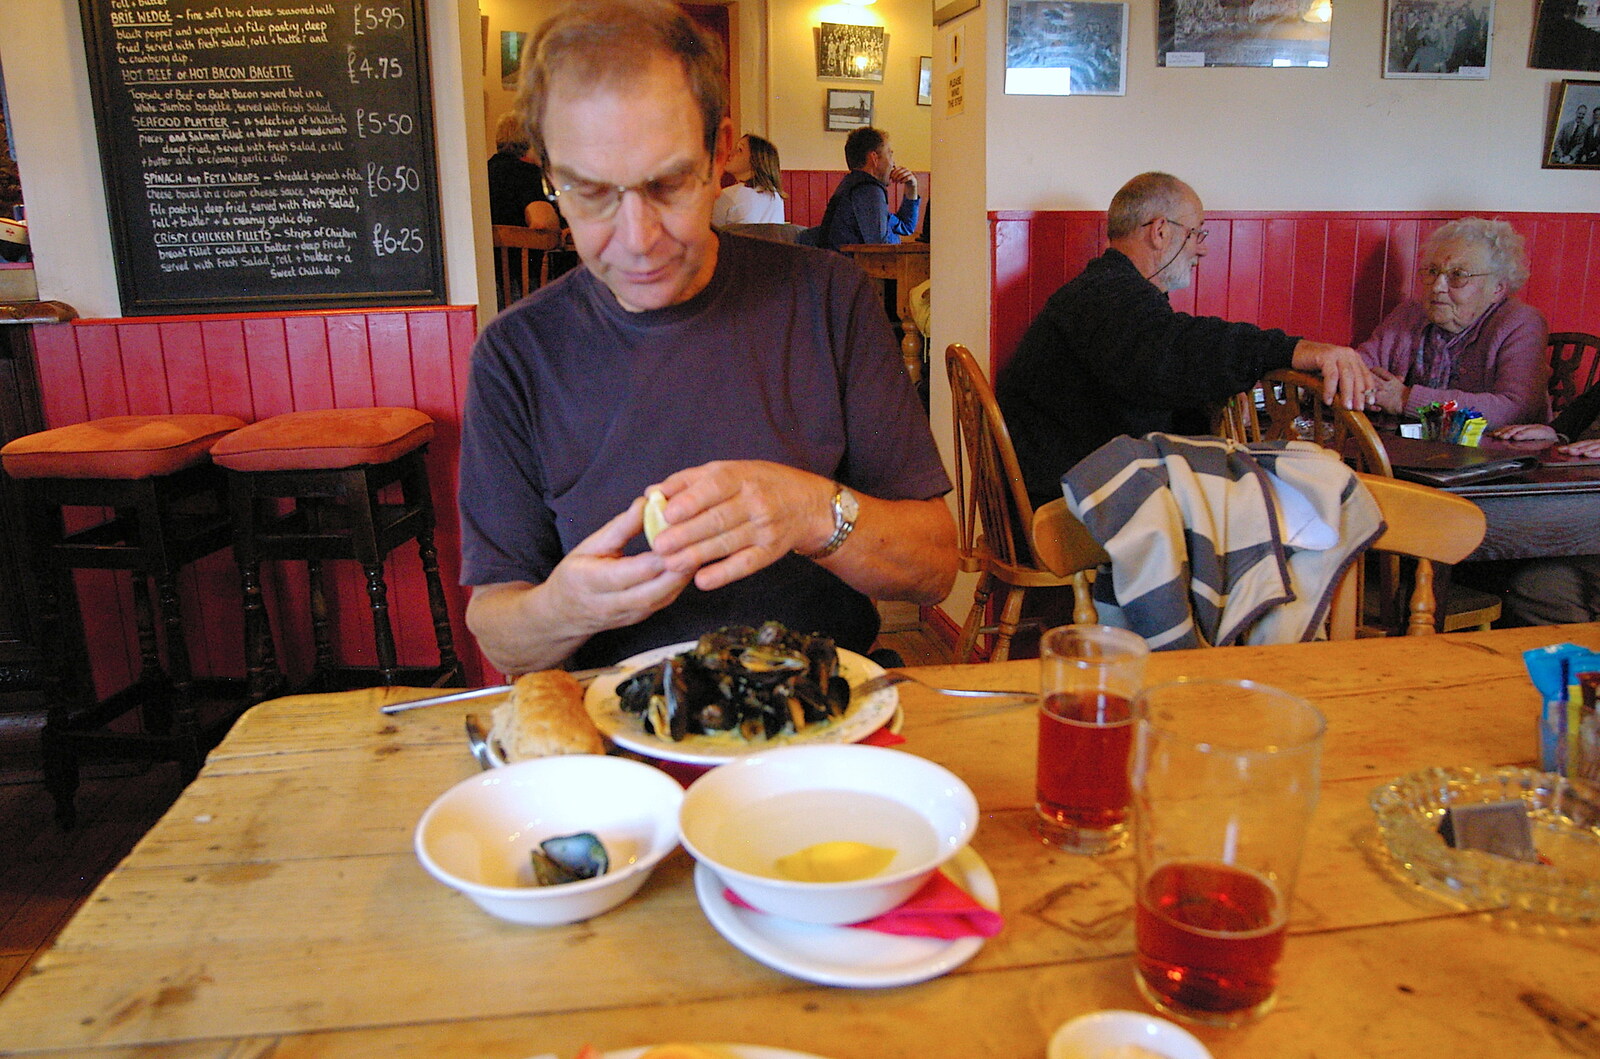 Mike eats a bowl of mussels from Mother, Mike and the Stiffkey Light Shop, Cley and Holkham - 6th November 2005